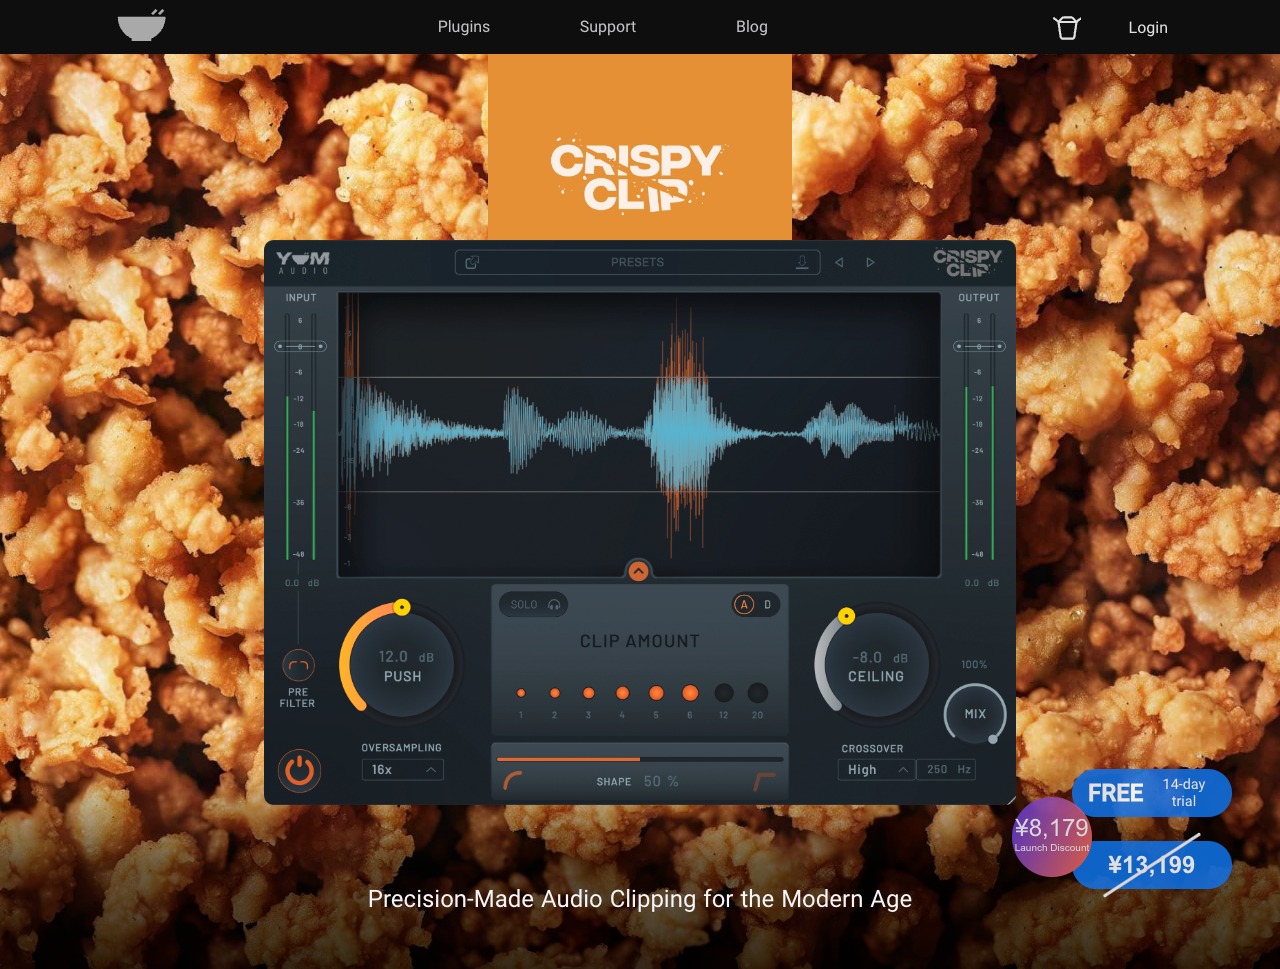 Crispy Clip by Yum Audio — Your Gateway to Absolute Clipping Accuracy.